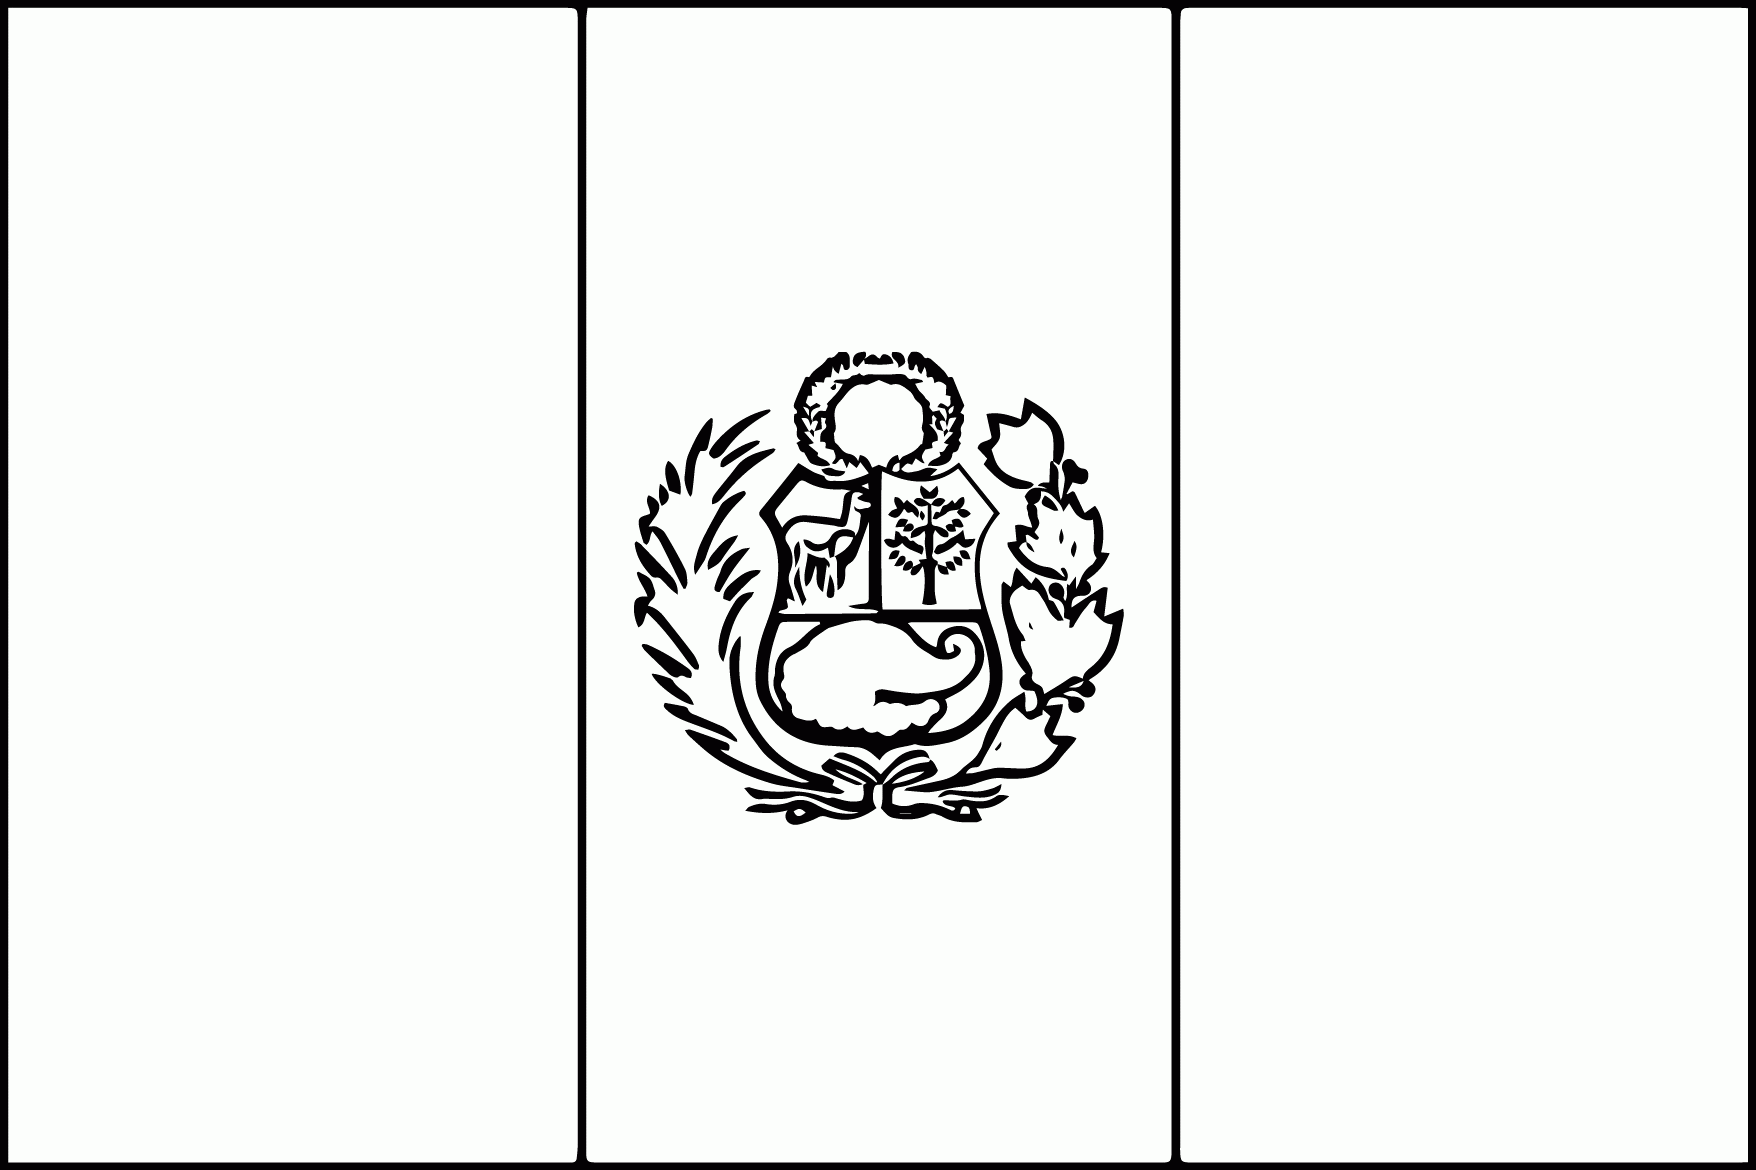 Peru Flag Coloring Page Free - Coloring Home